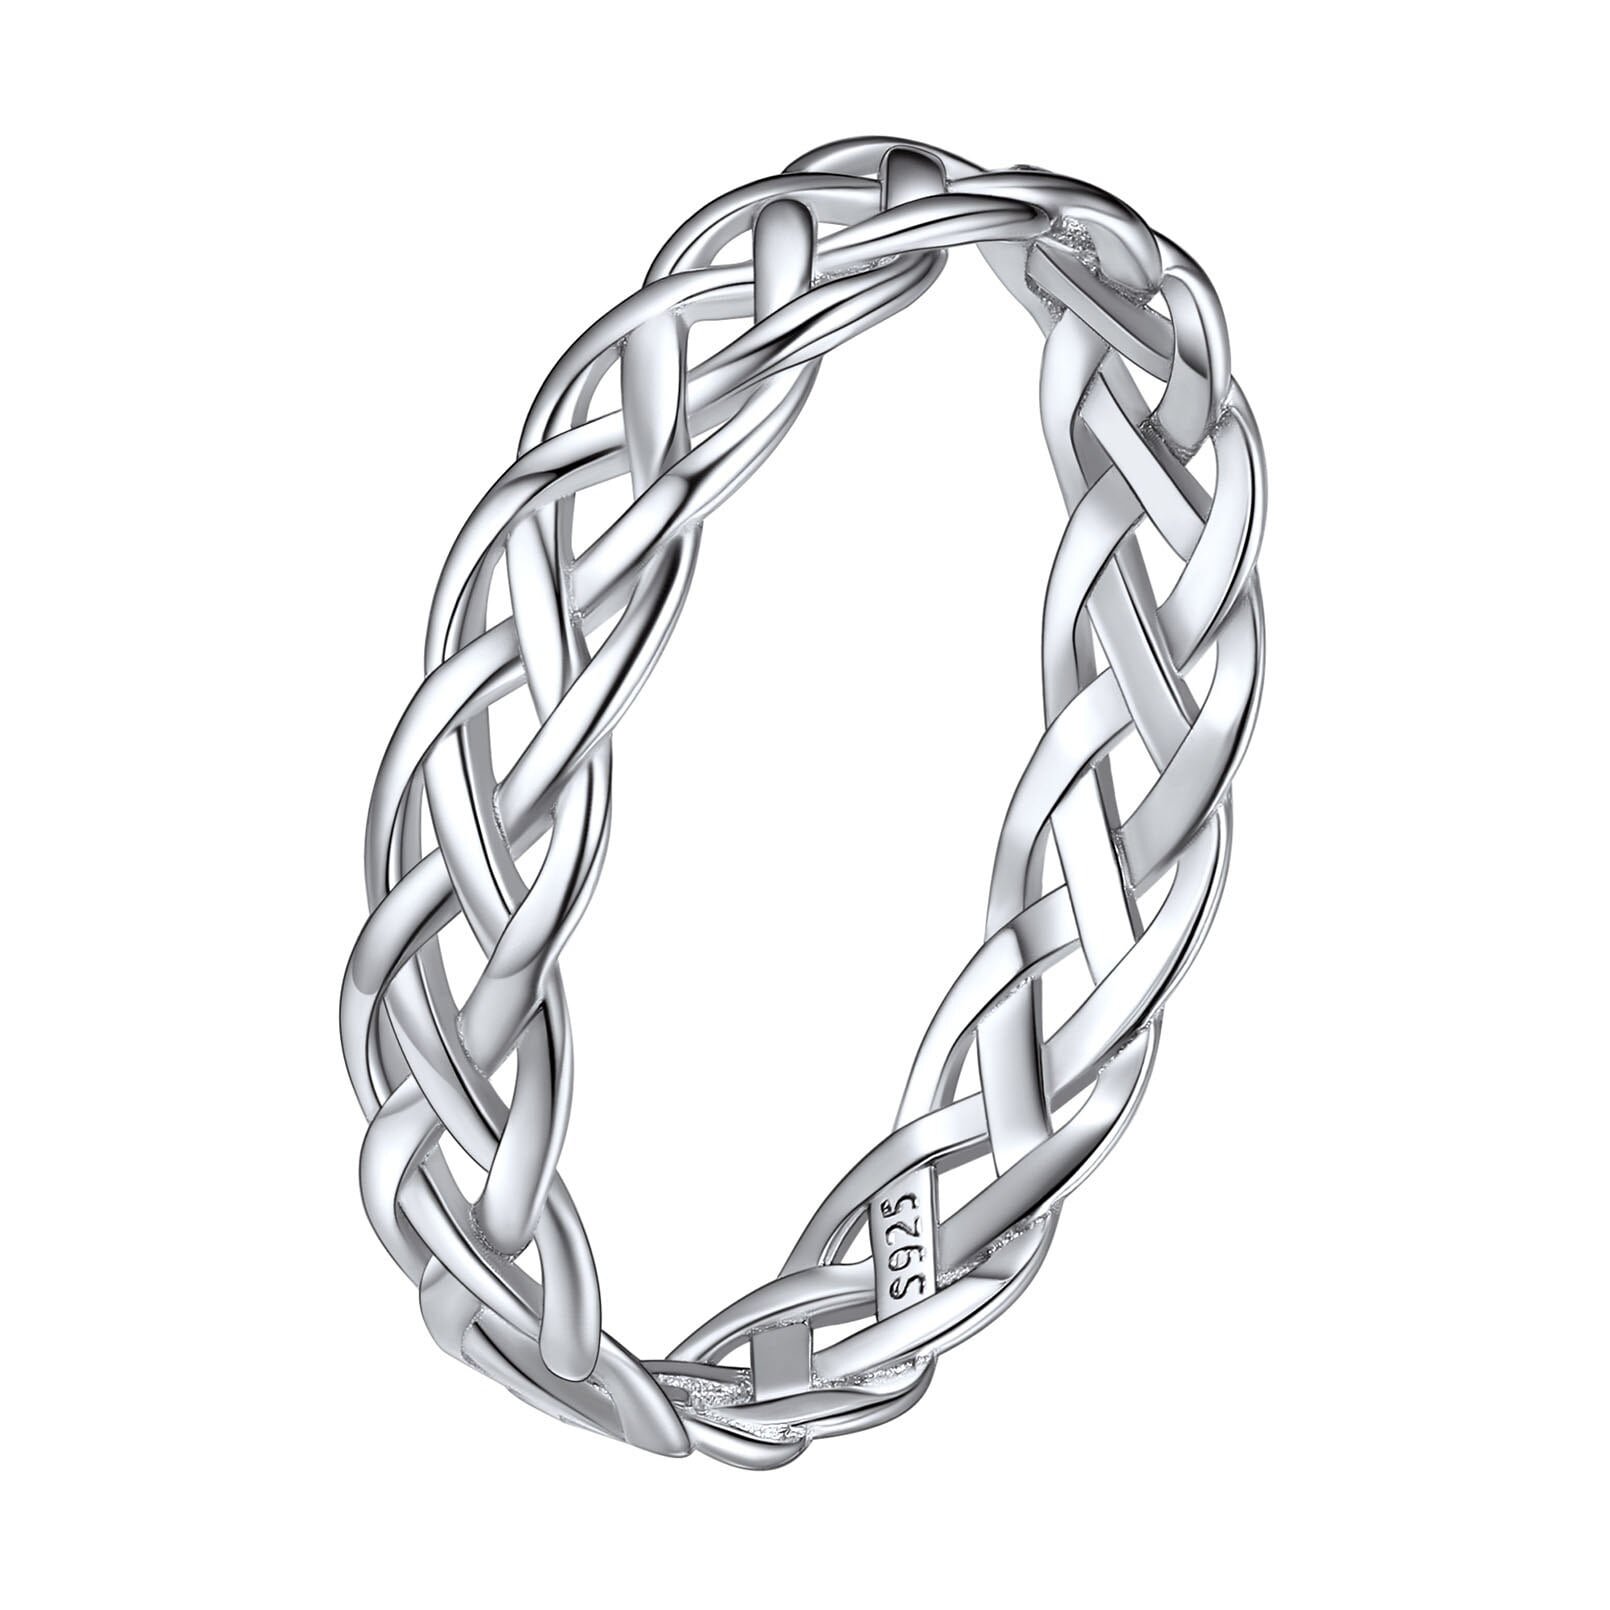 Princess Russian CZ Eternity Wedding Band .925 Sterling Silver Ring Sizes 4-12 